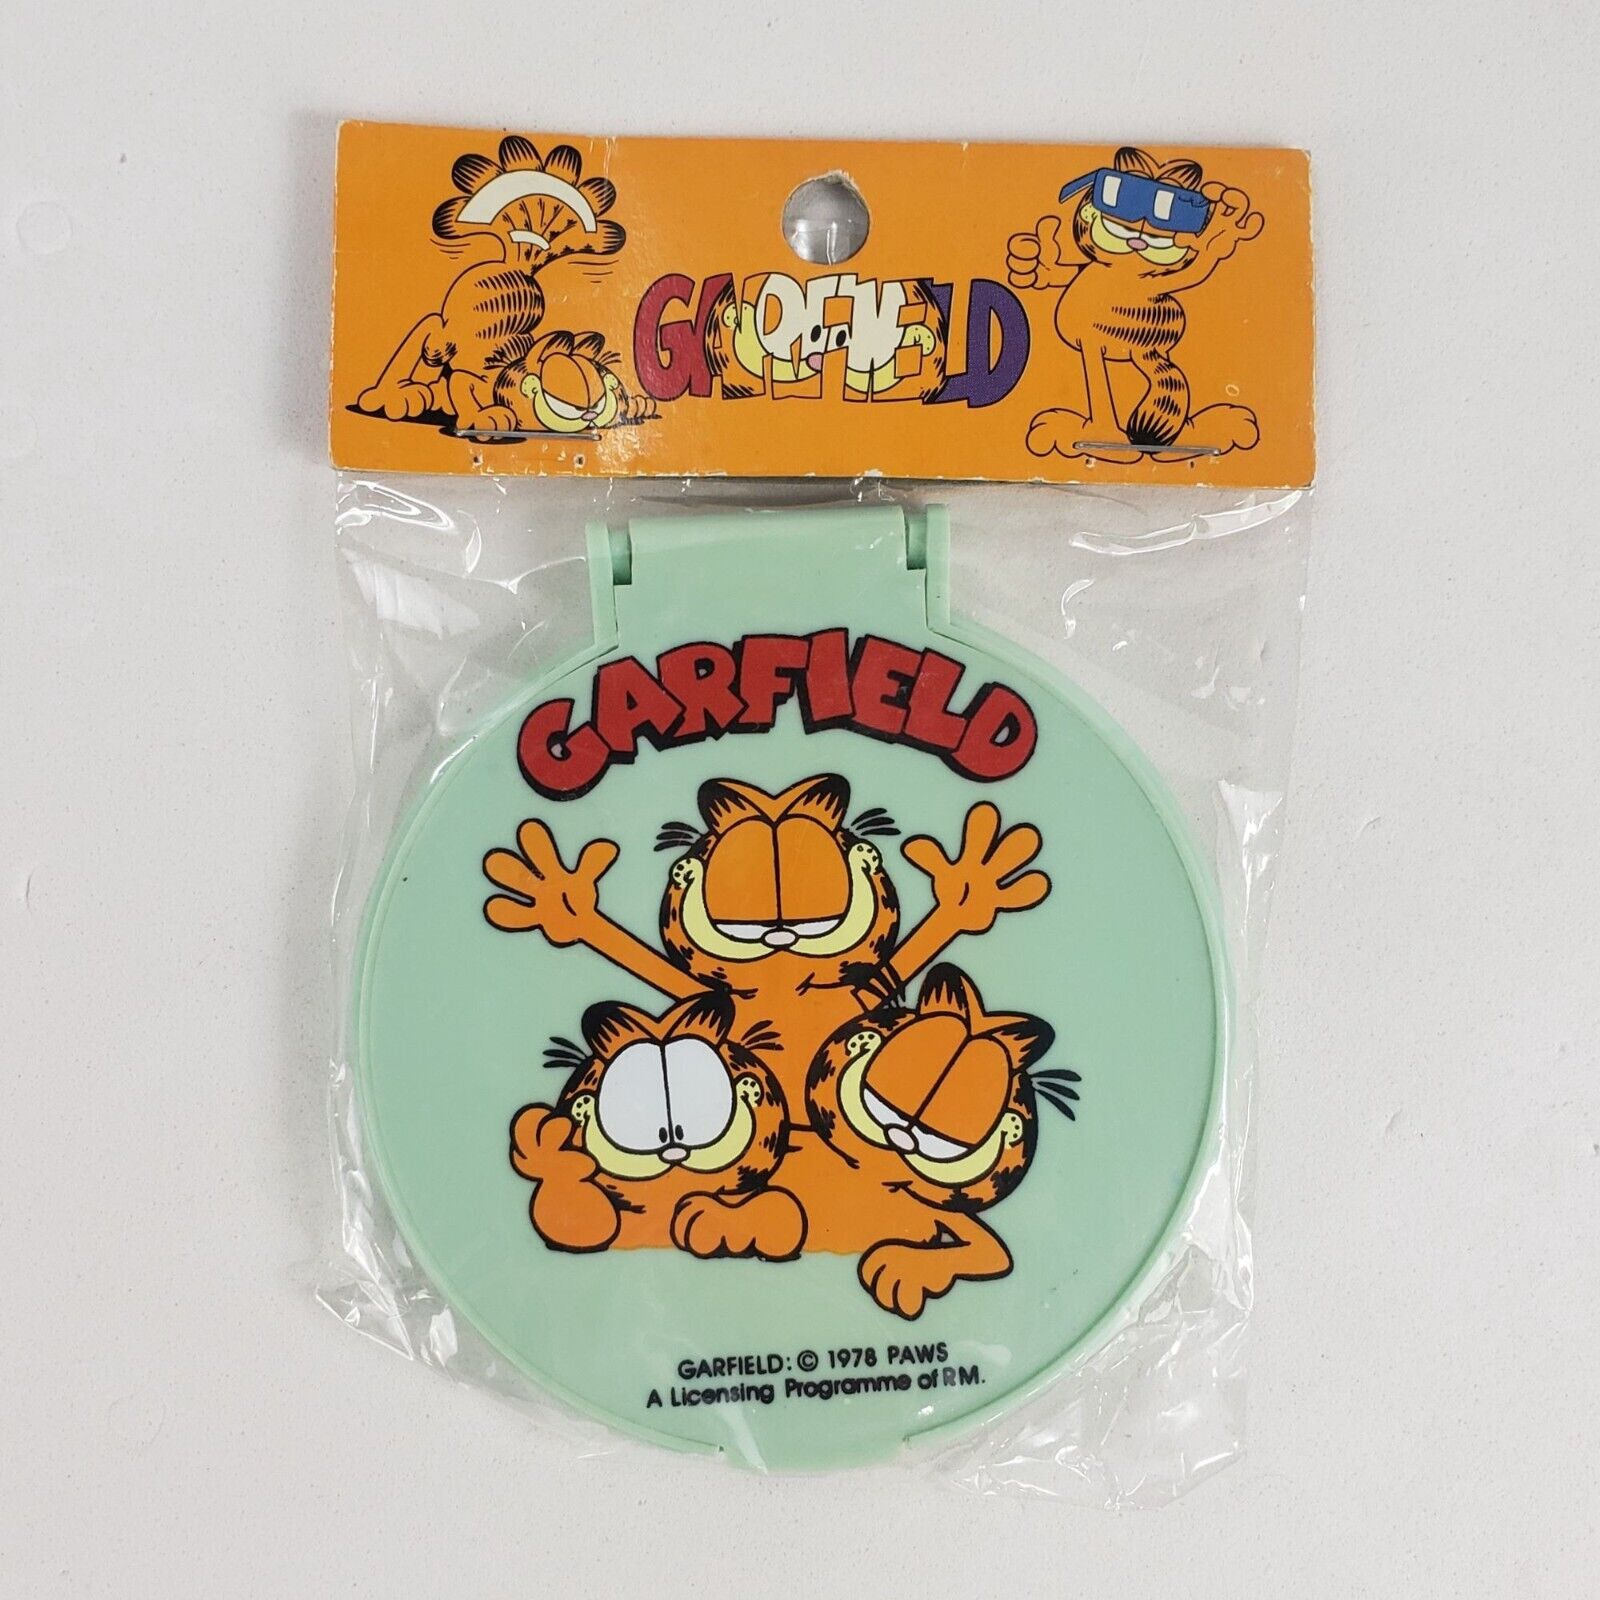 NOS Vintage 1978 Garfield the Cat Cosmetic Travel Mirror Paws from Gift Land